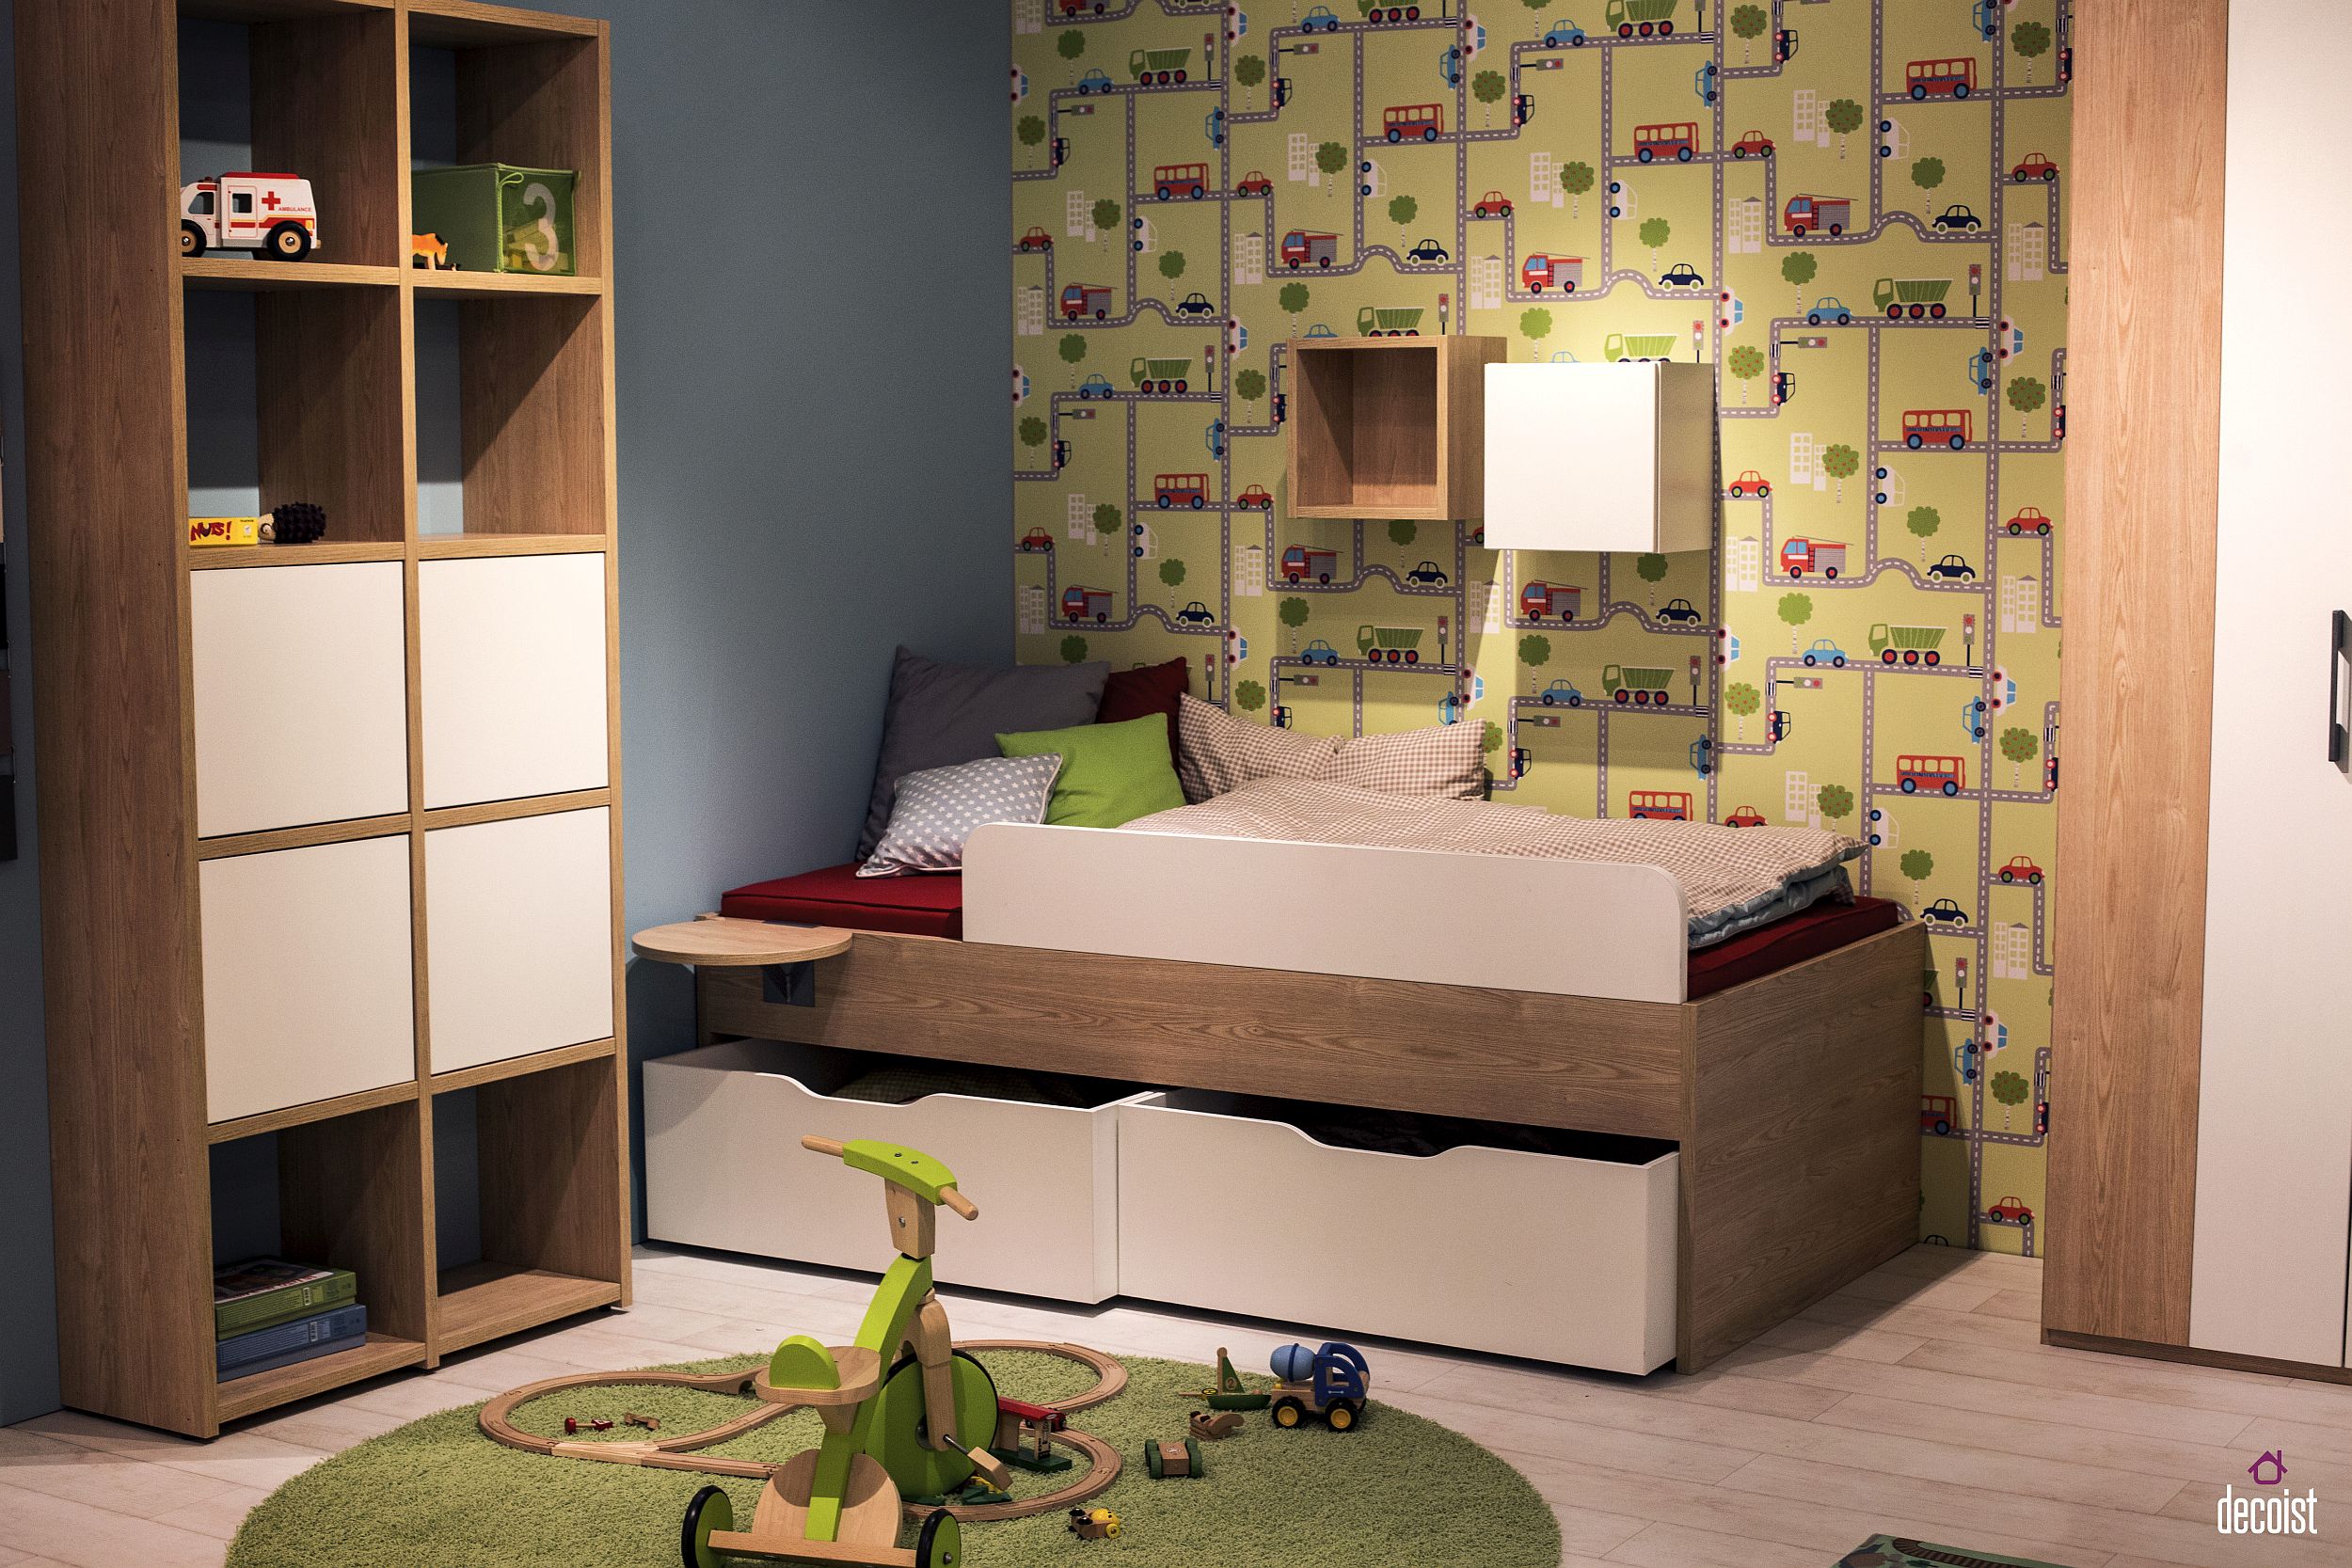 Small-kidsbedroom-decorating-idea-with-trundle-bed-in-corner-and-tall-open-shelves